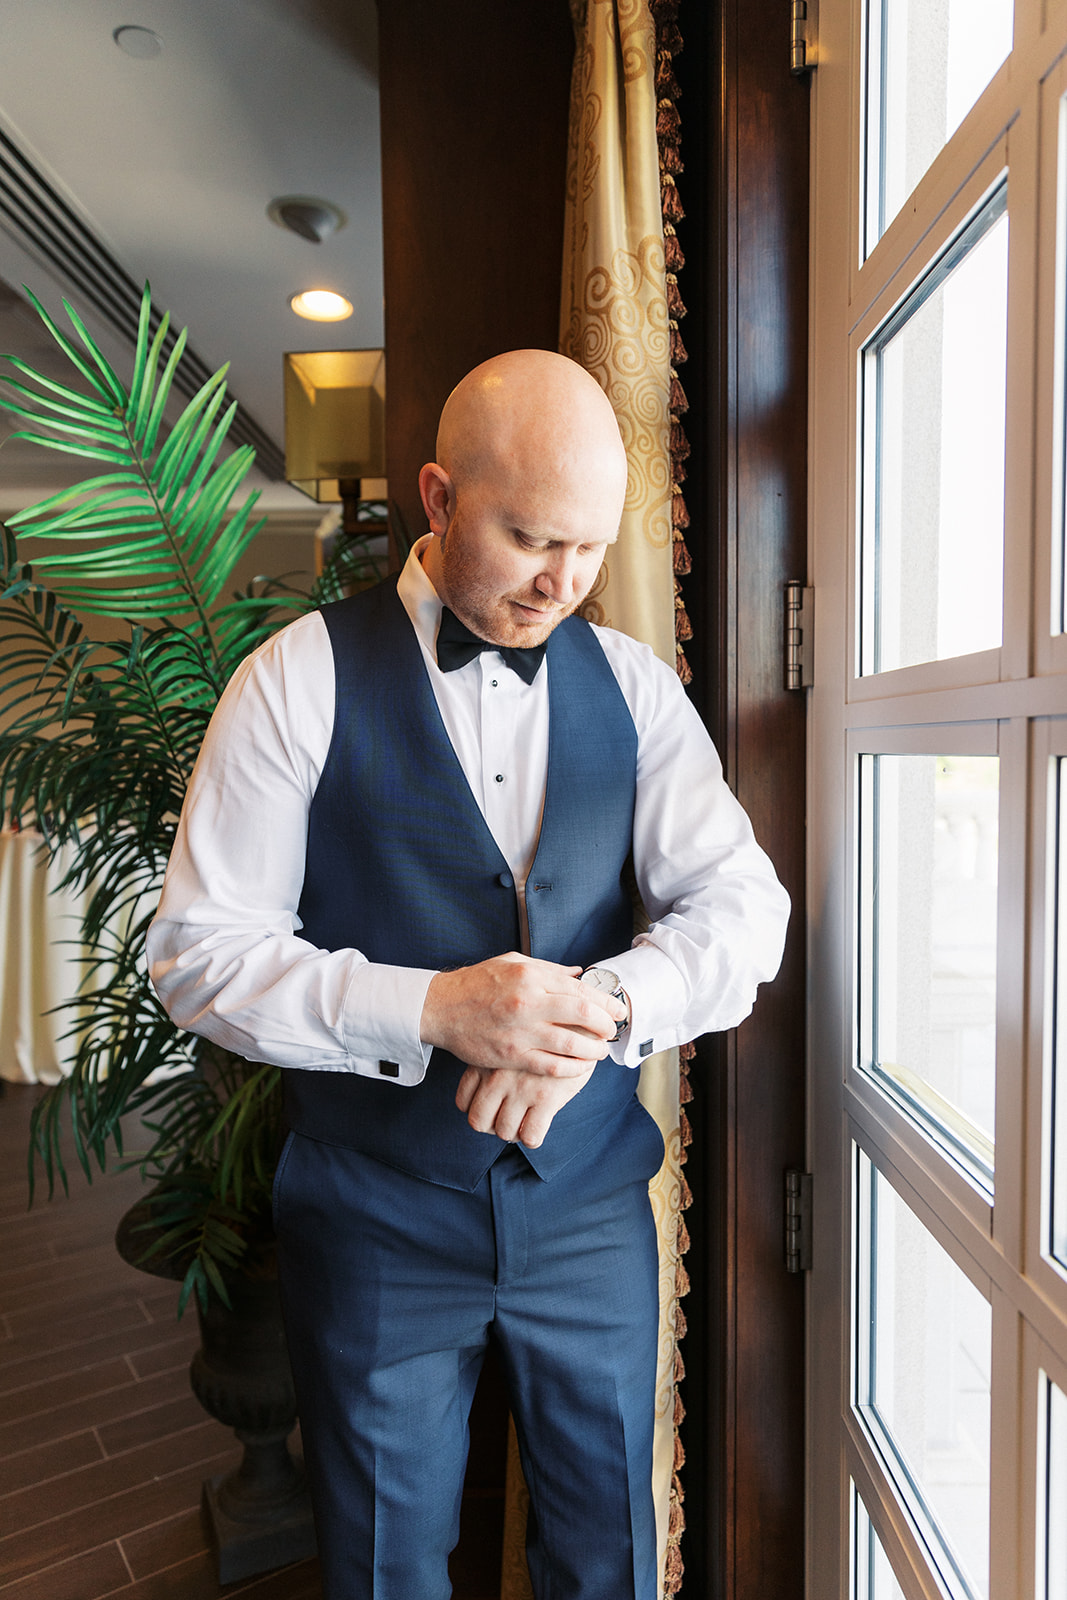 A groom in a blue suit checks his watch while standing in a window getting ready